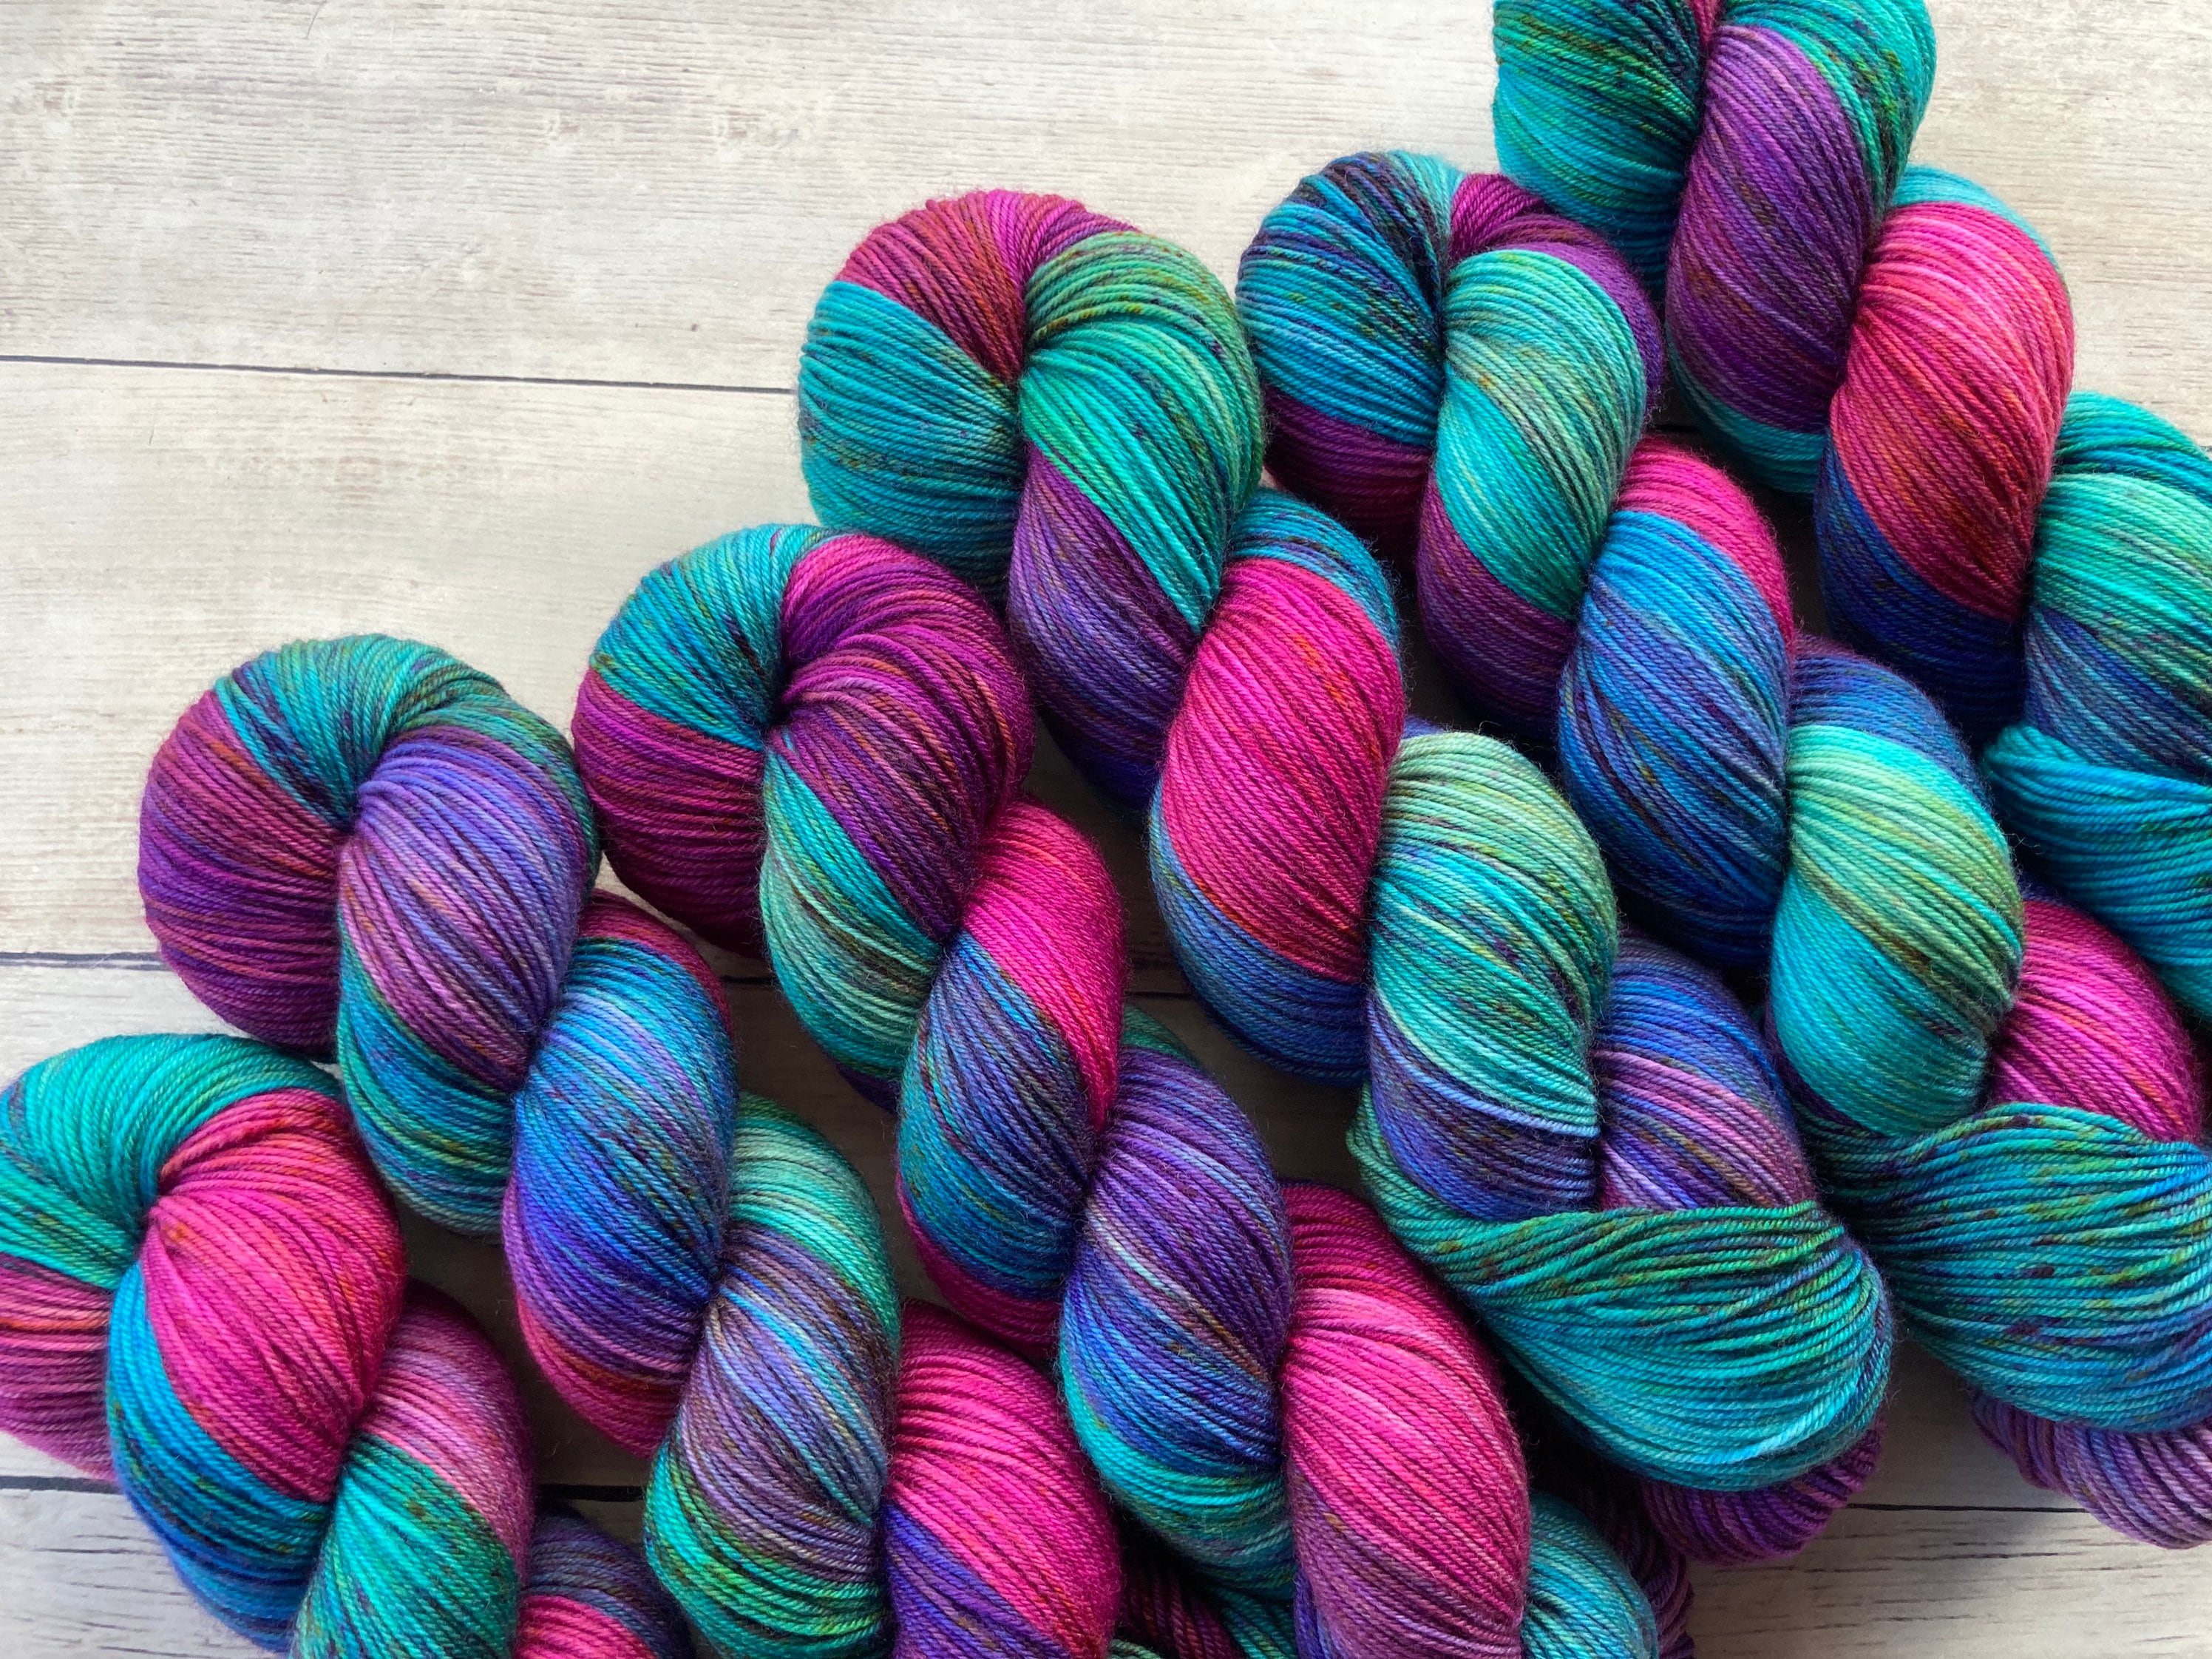 Black Owned Yarn Businesses You Should Know - SHOPPE BLACK